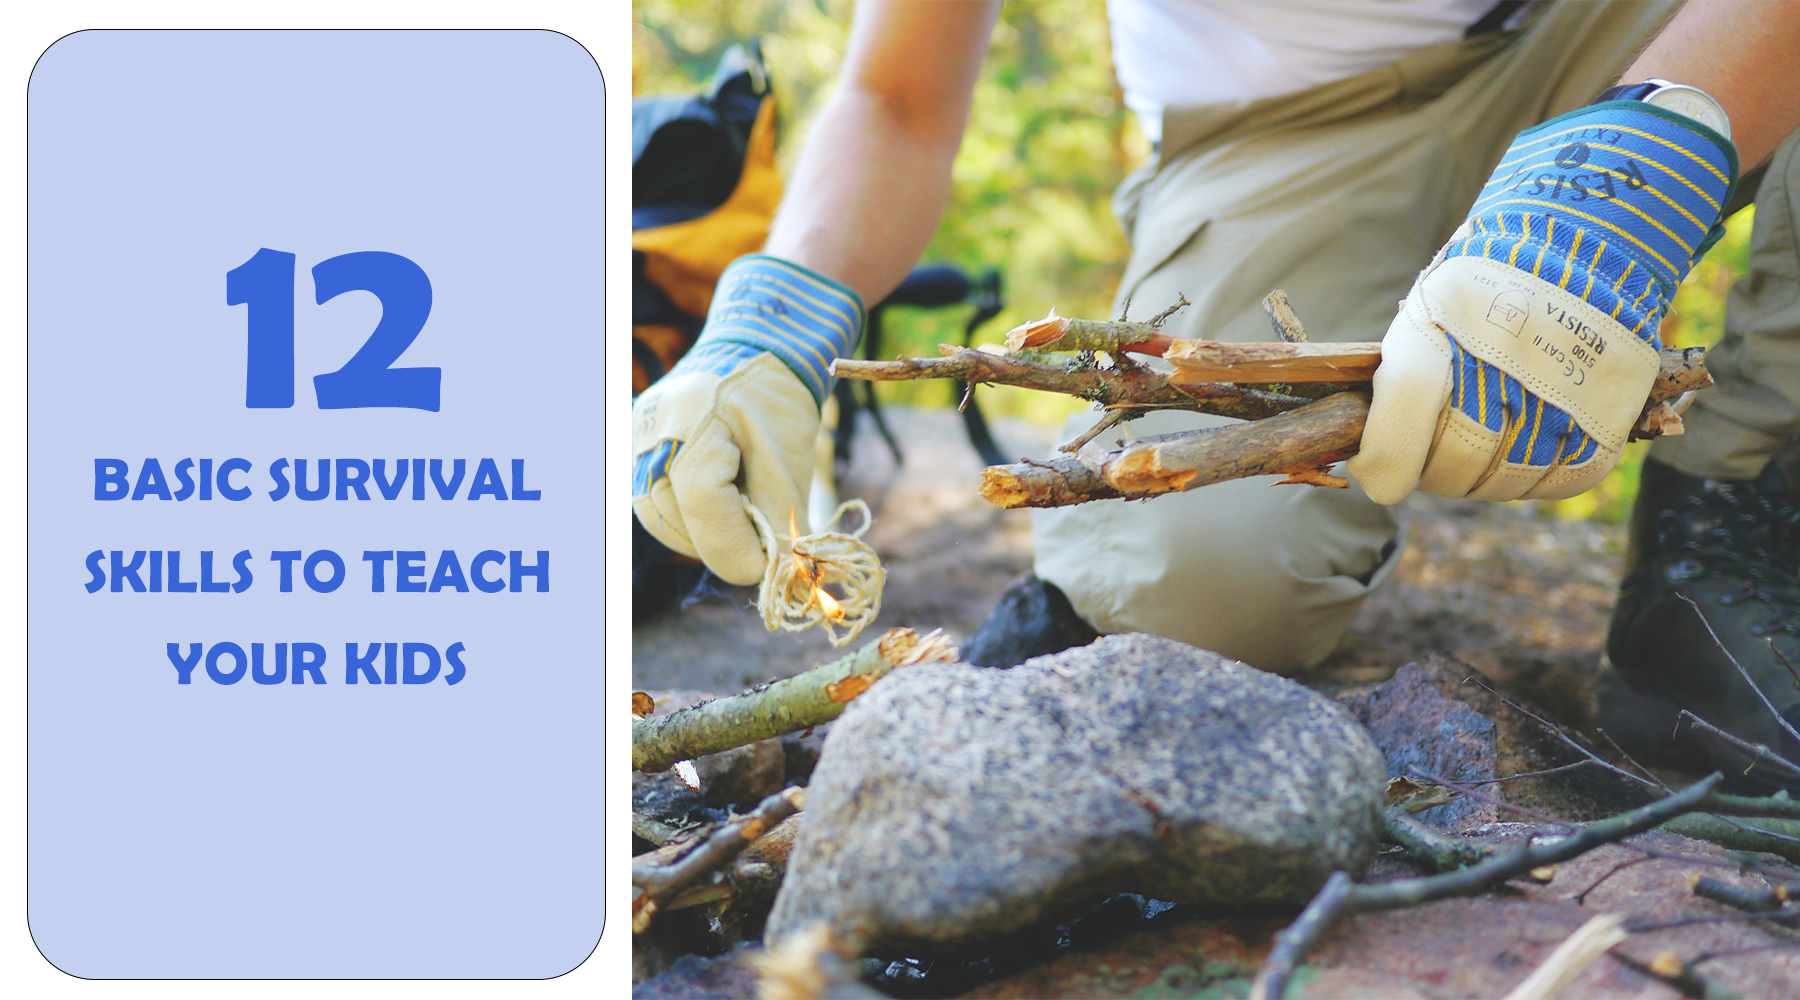 12 Basic Survival Skills To Teach Your Kids